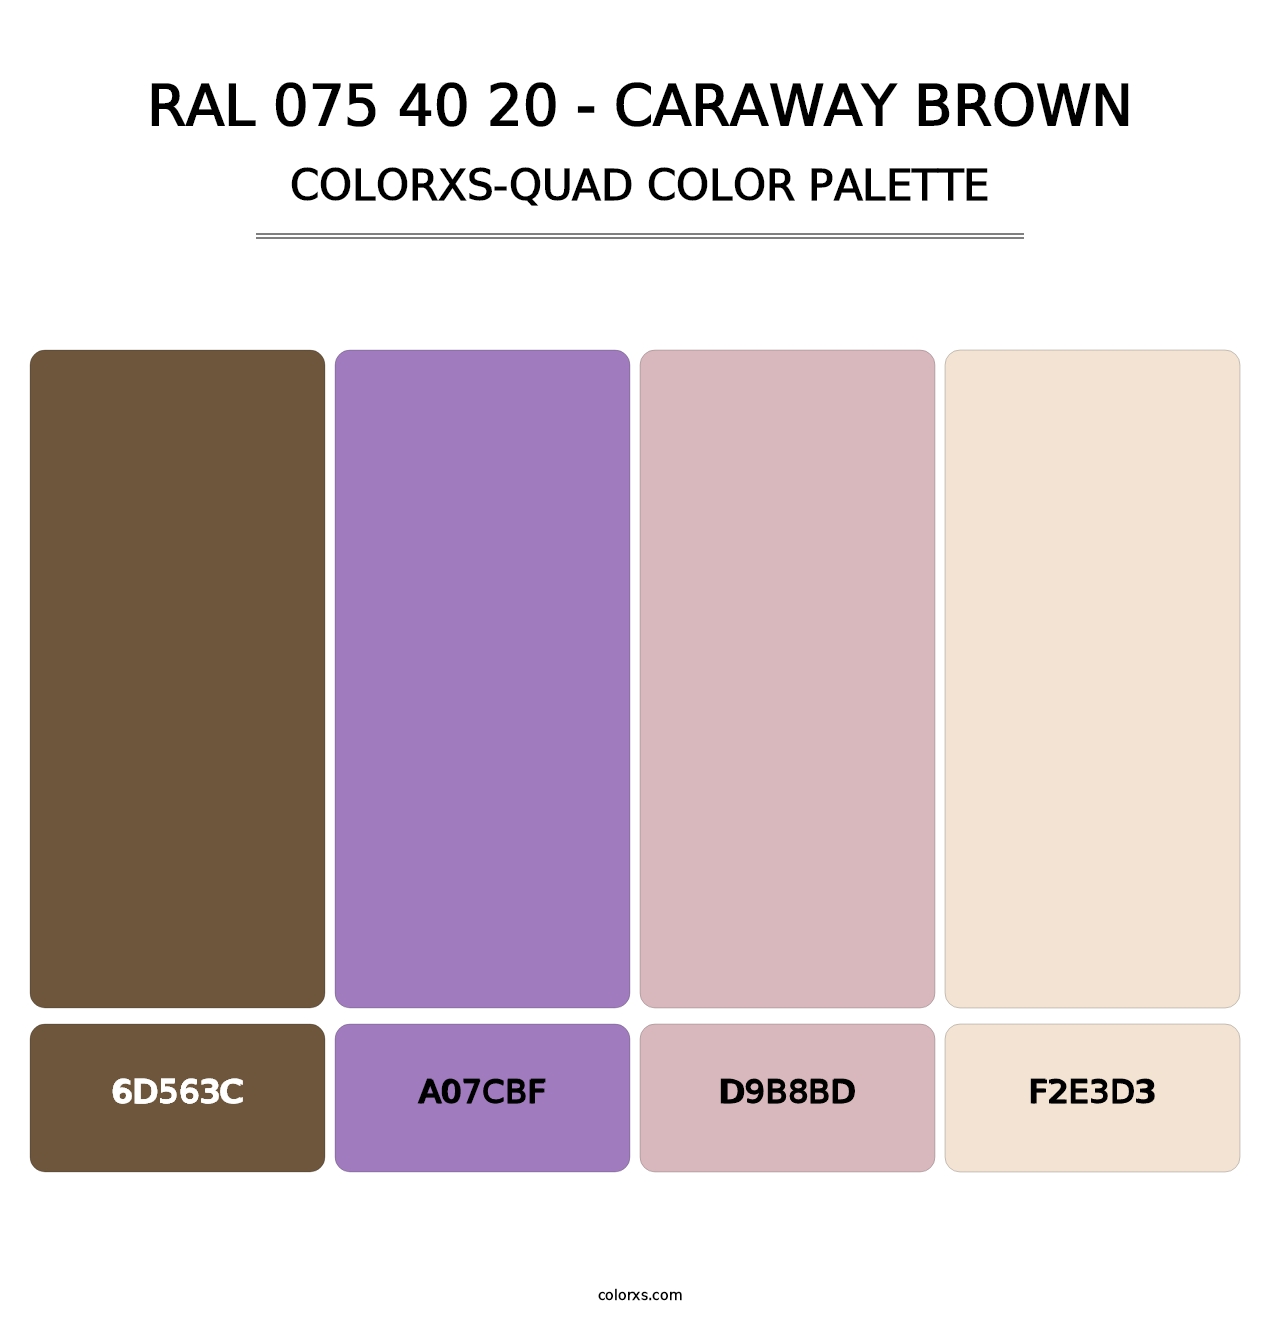 RAL 075 40 20 - Caraway Brown - Colorxs Quad Palette